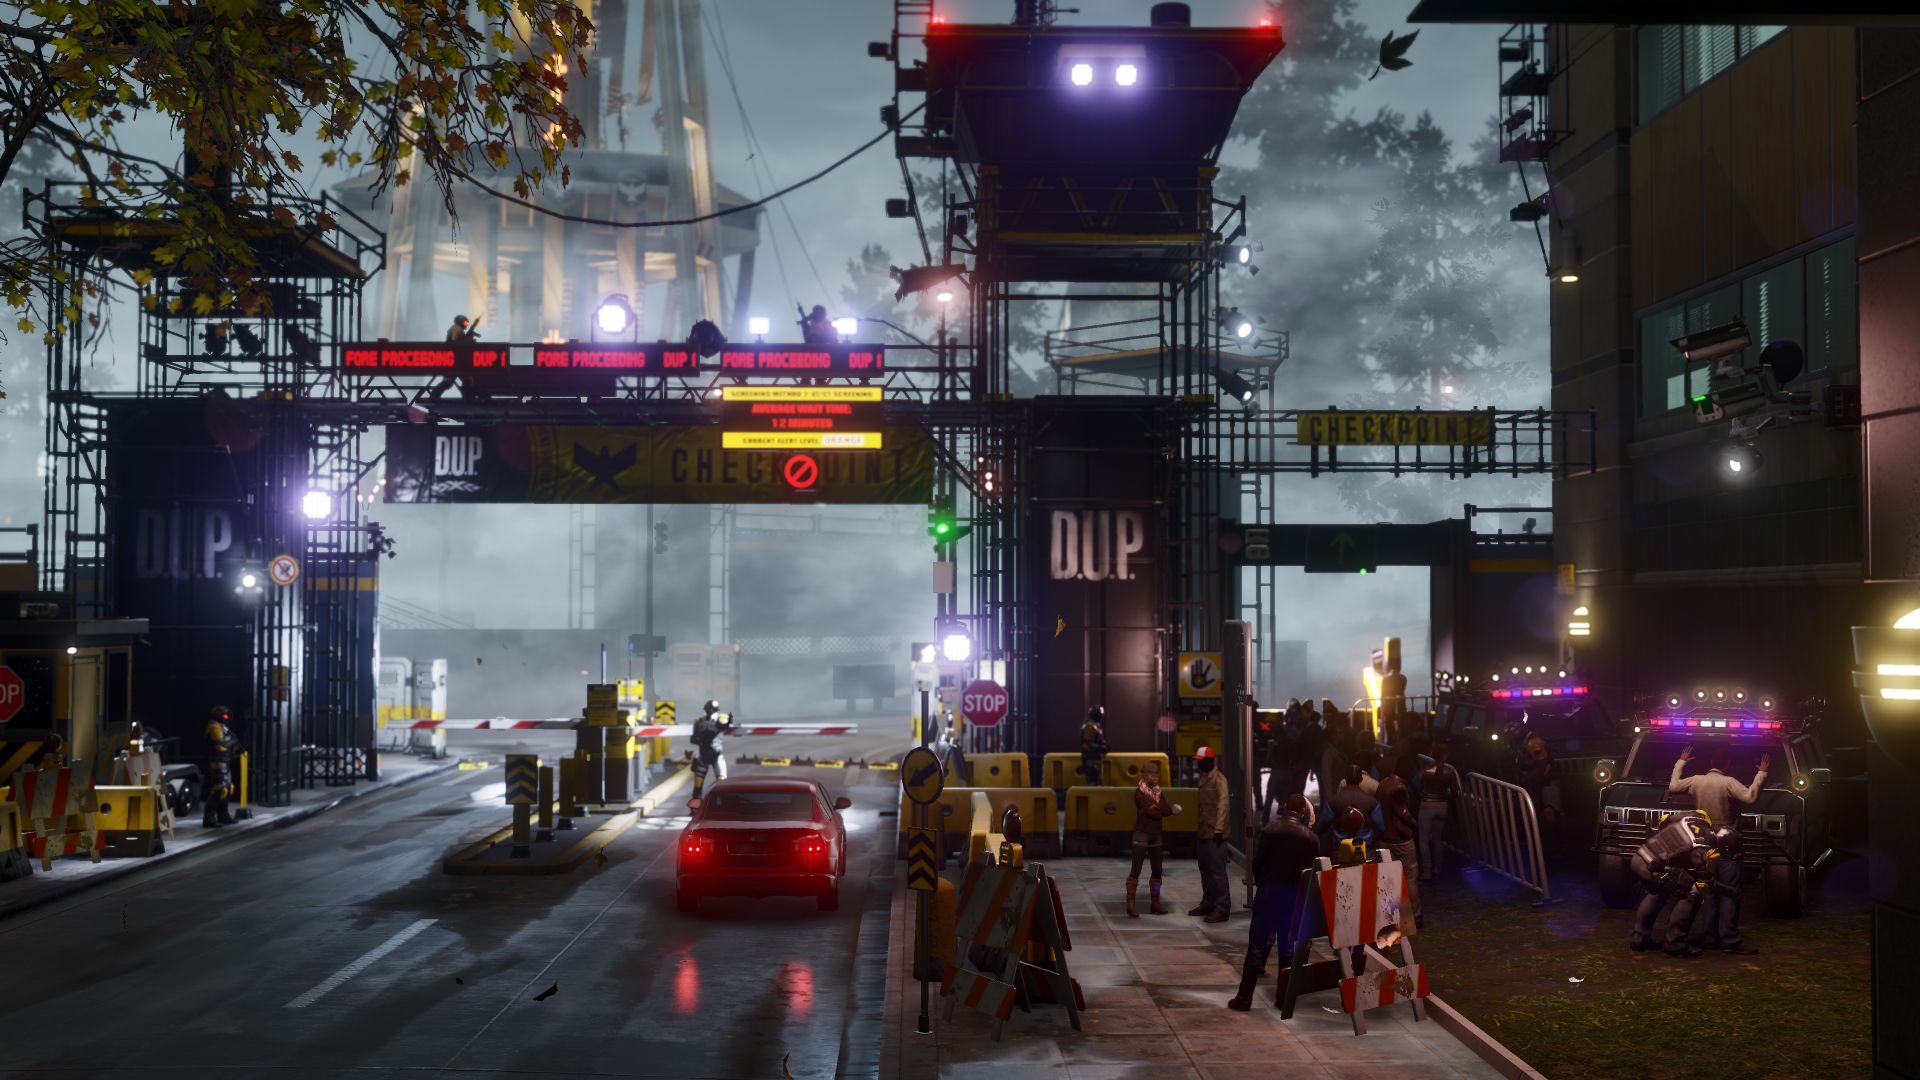 infamous second son gameplay preview eyes on sony ps4 title image 13